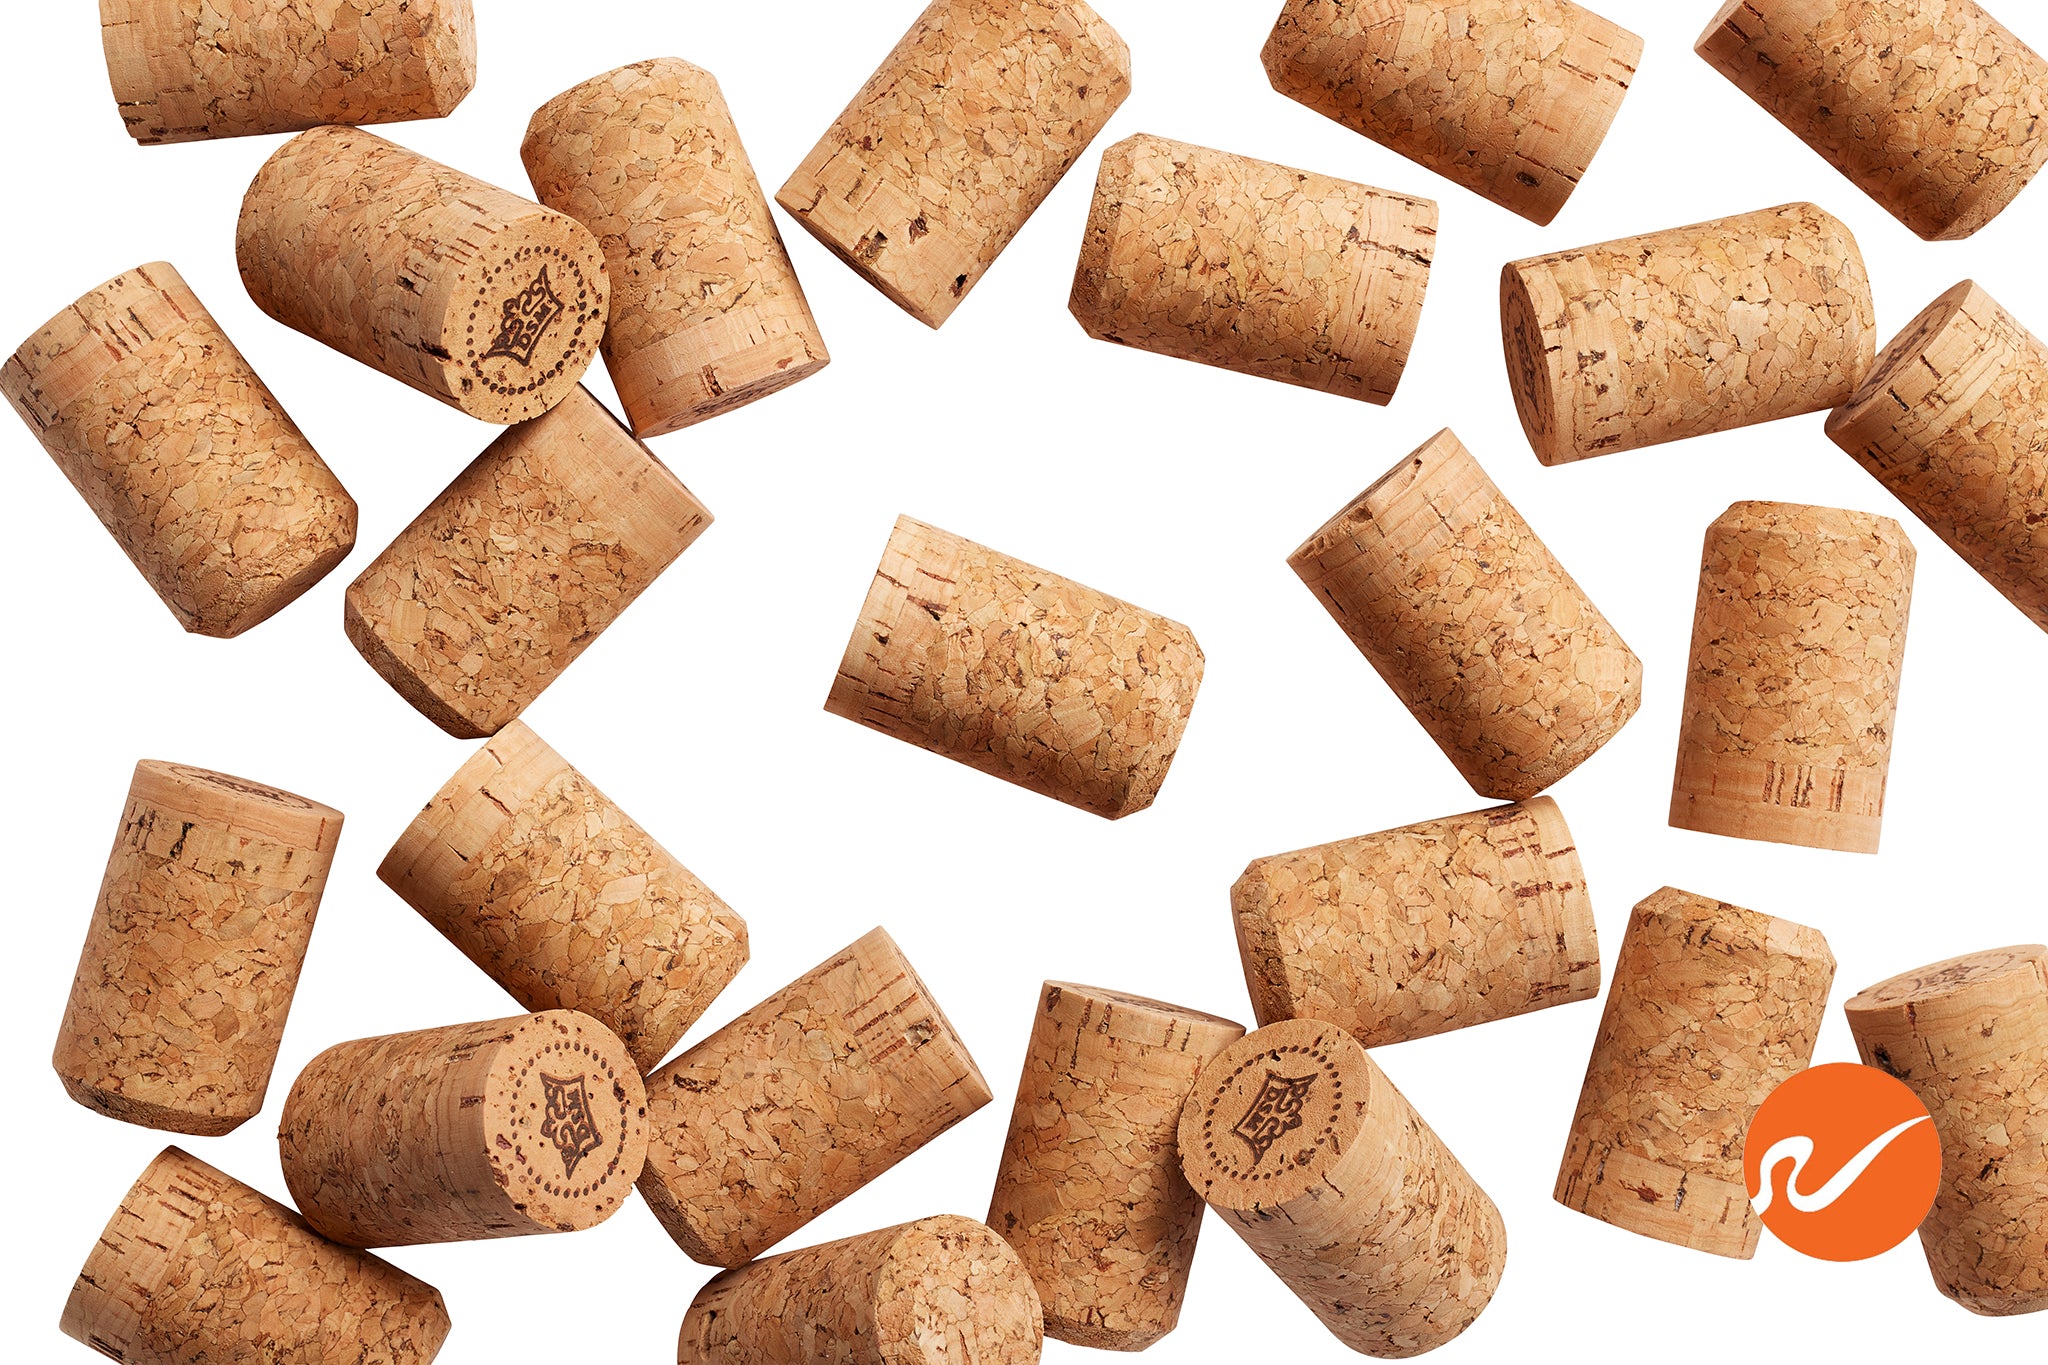 WINE CORKS200 Used Wine Corks for Repurposing and Crafts Natural